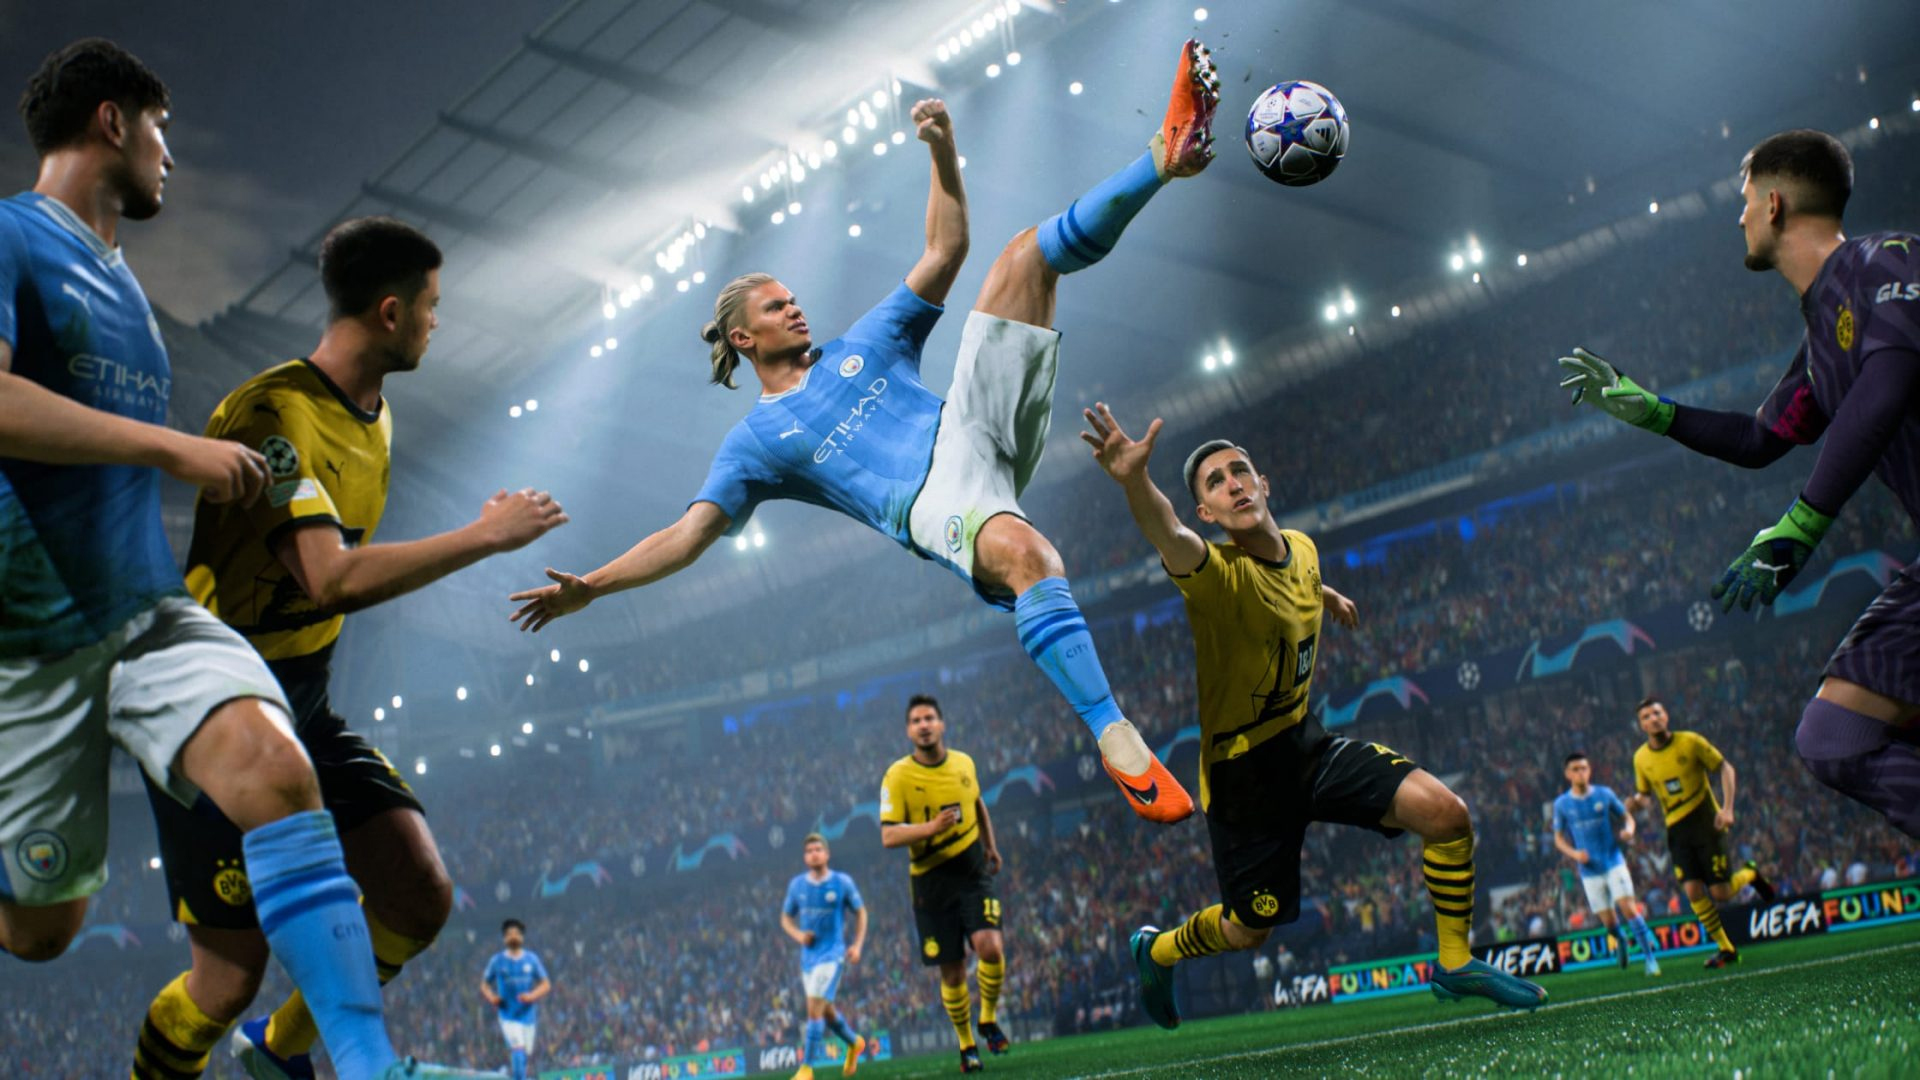 Electronic Arts Ushers in a New Generation of Mobile Gaming with Game  Changing Updates for New Season of EA SPORTS FIFA Mobile